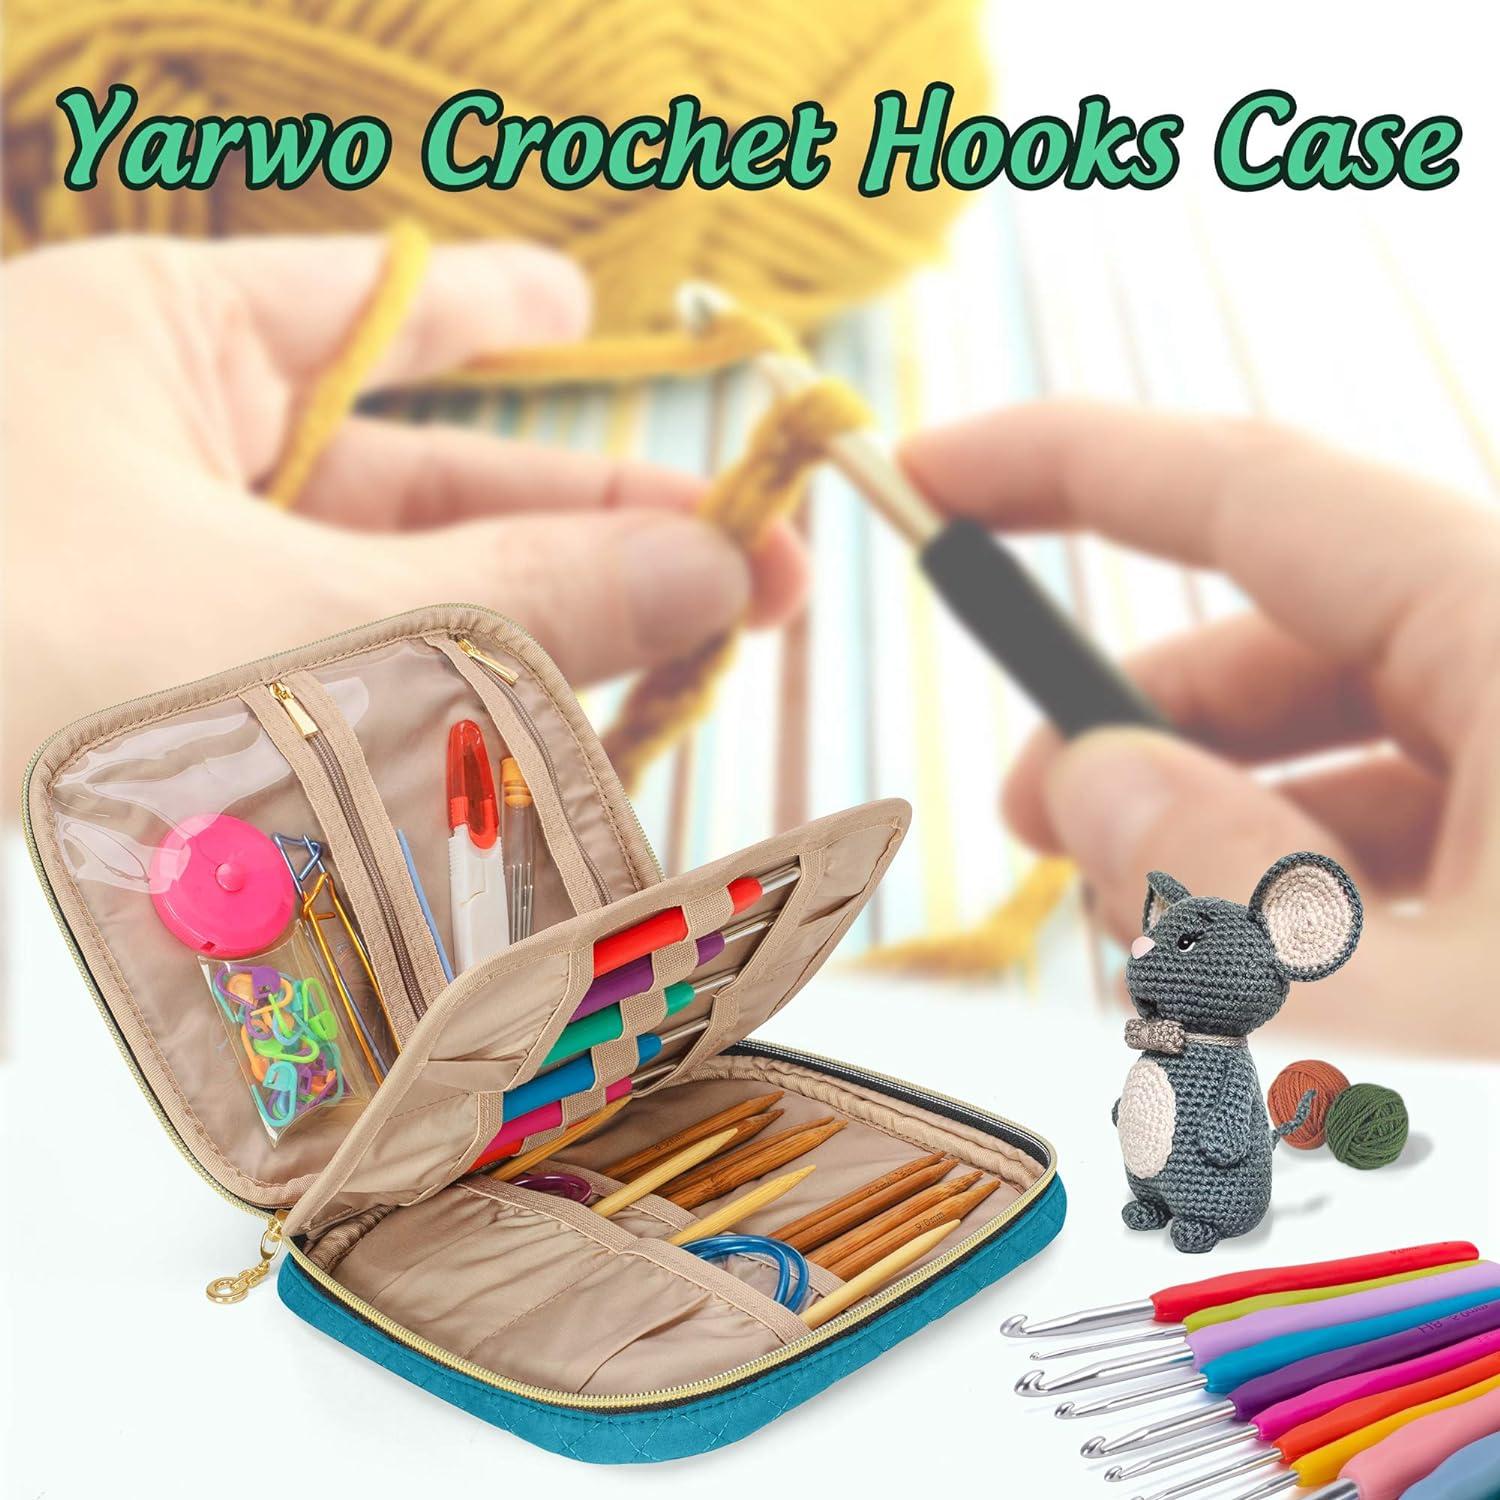 YARWO Crochet Hook Case Travel Organizer Holder for Crochet Hooks Circular  Knitting Needles Knitting Needles (up to 8) and Other Supplies Teal (Bag  Only Patented Design)